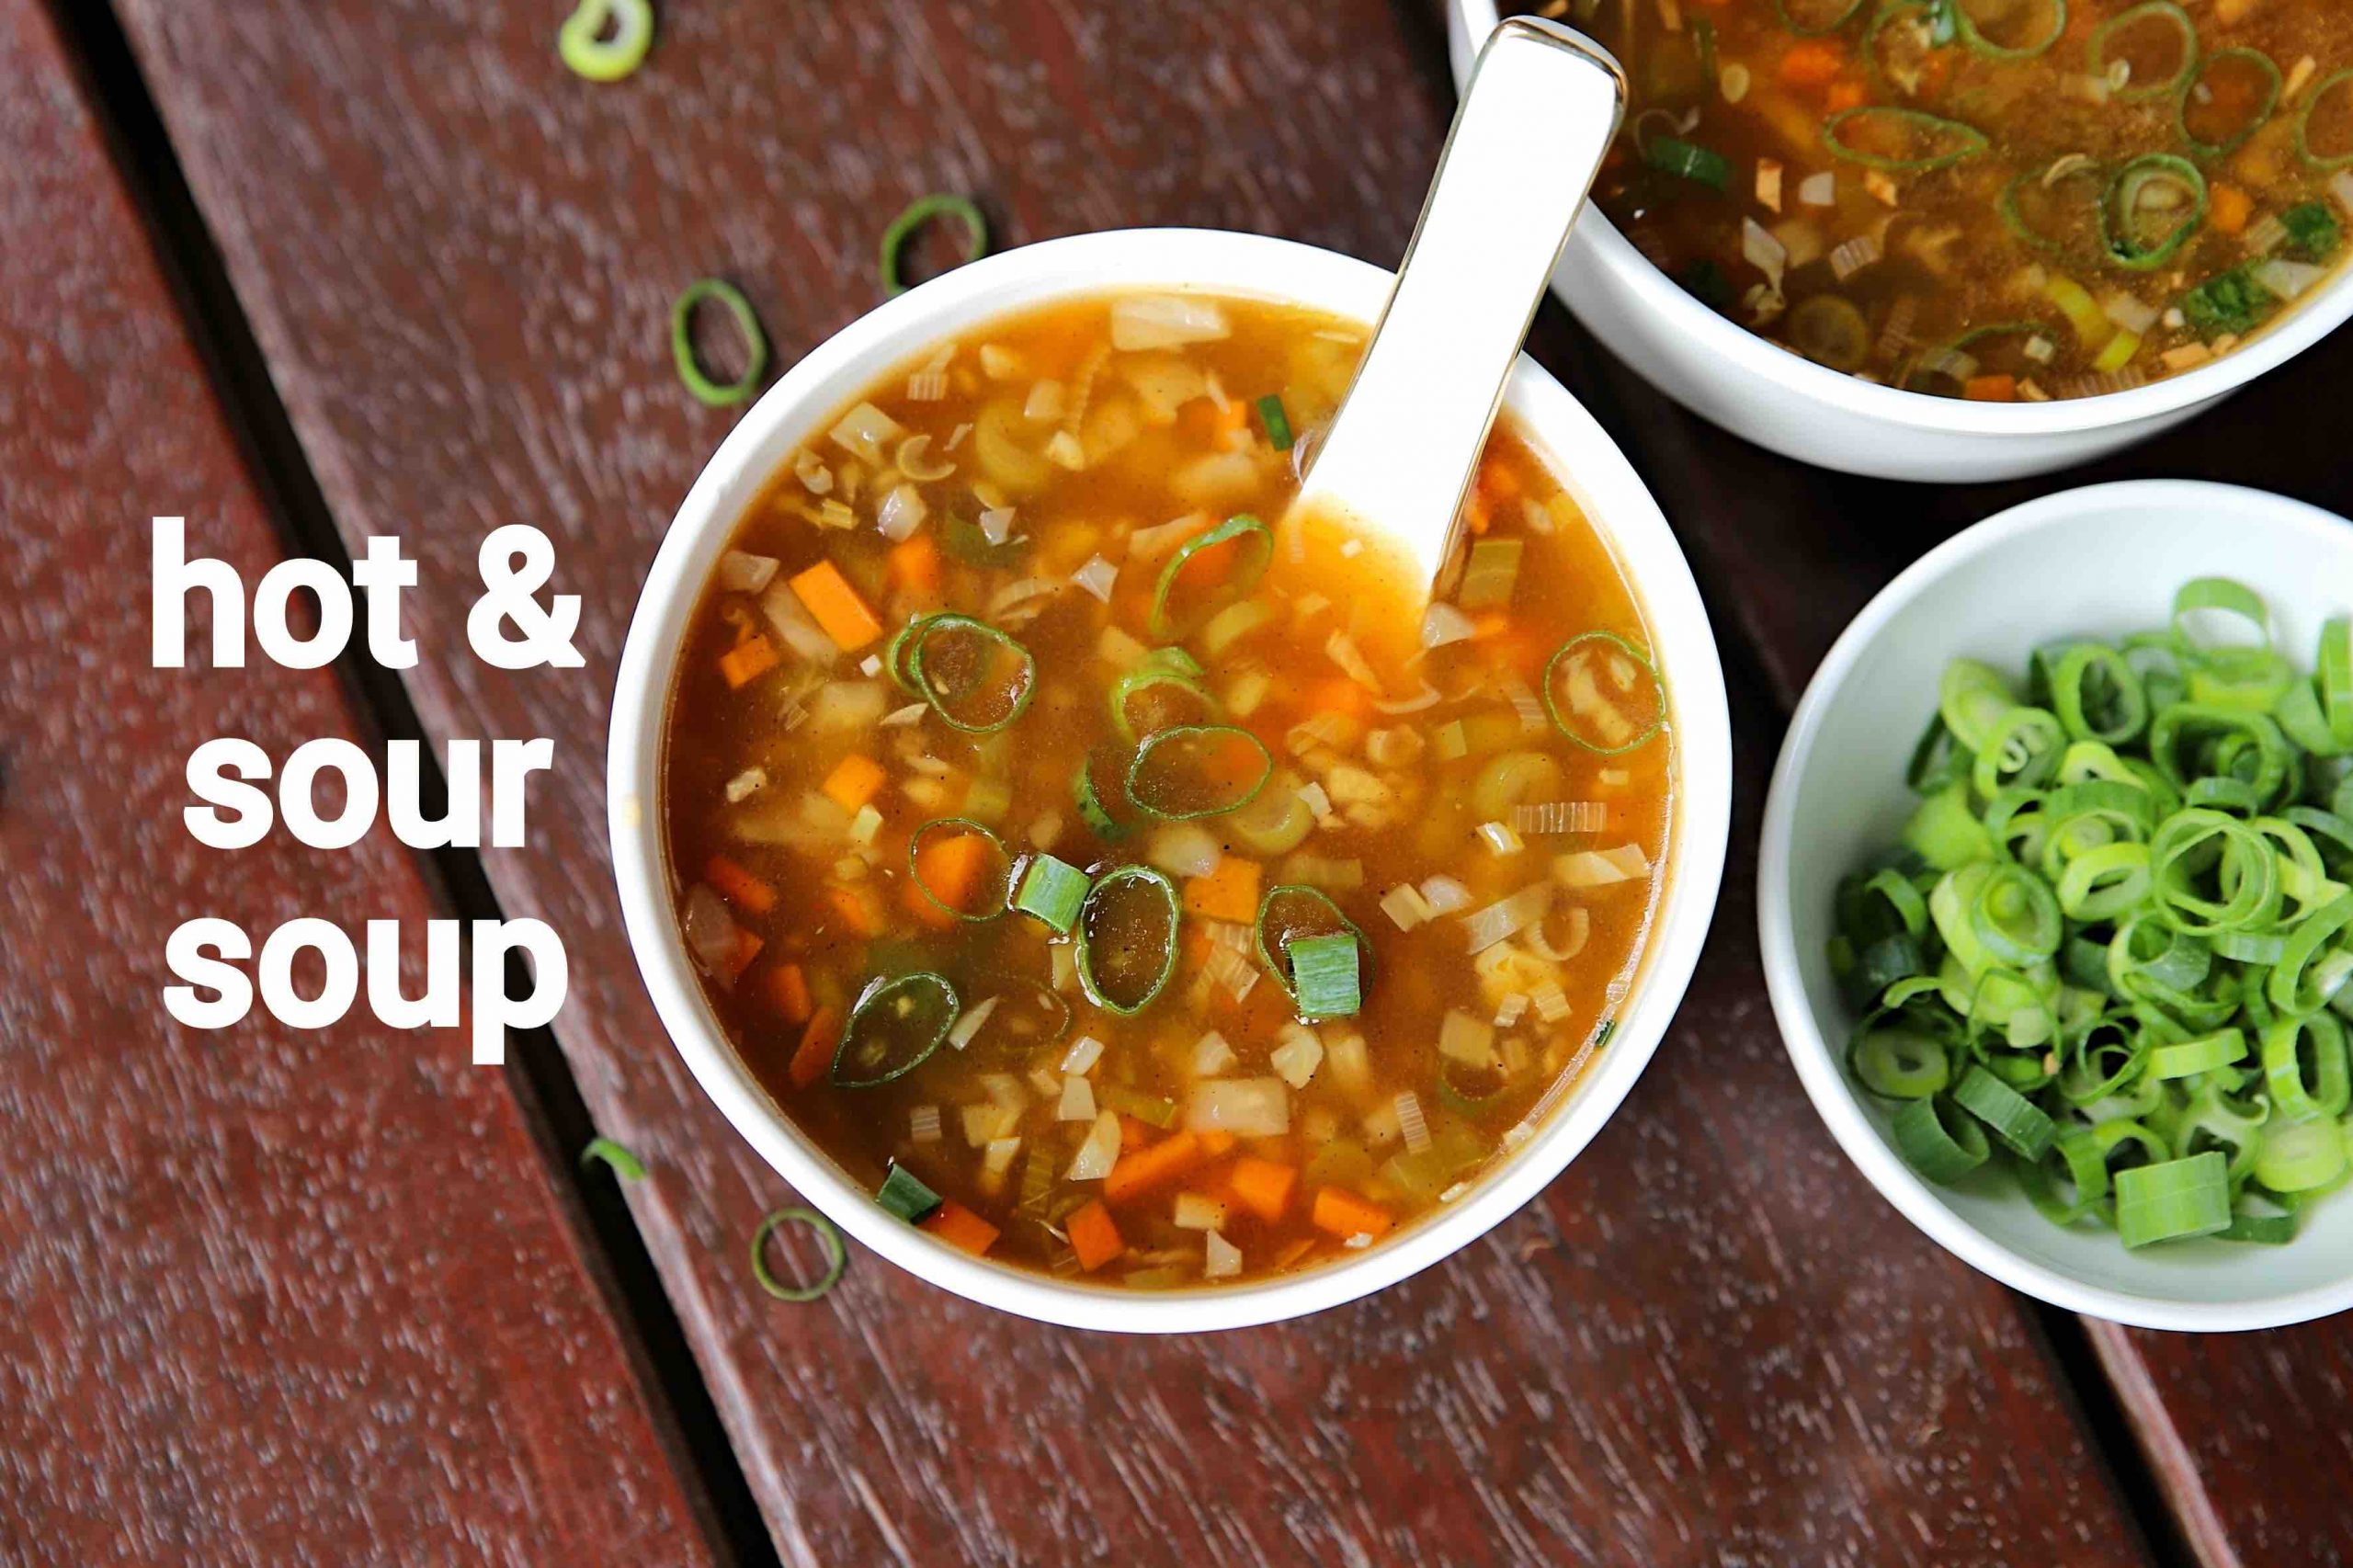 https://hebbarskitchen.com/wp-content/uploads/2020/01/hot-and-sour-soup-recipe-hot-n-sour-soup-hot-sour-soup-recipe-2-scaled.jpeg